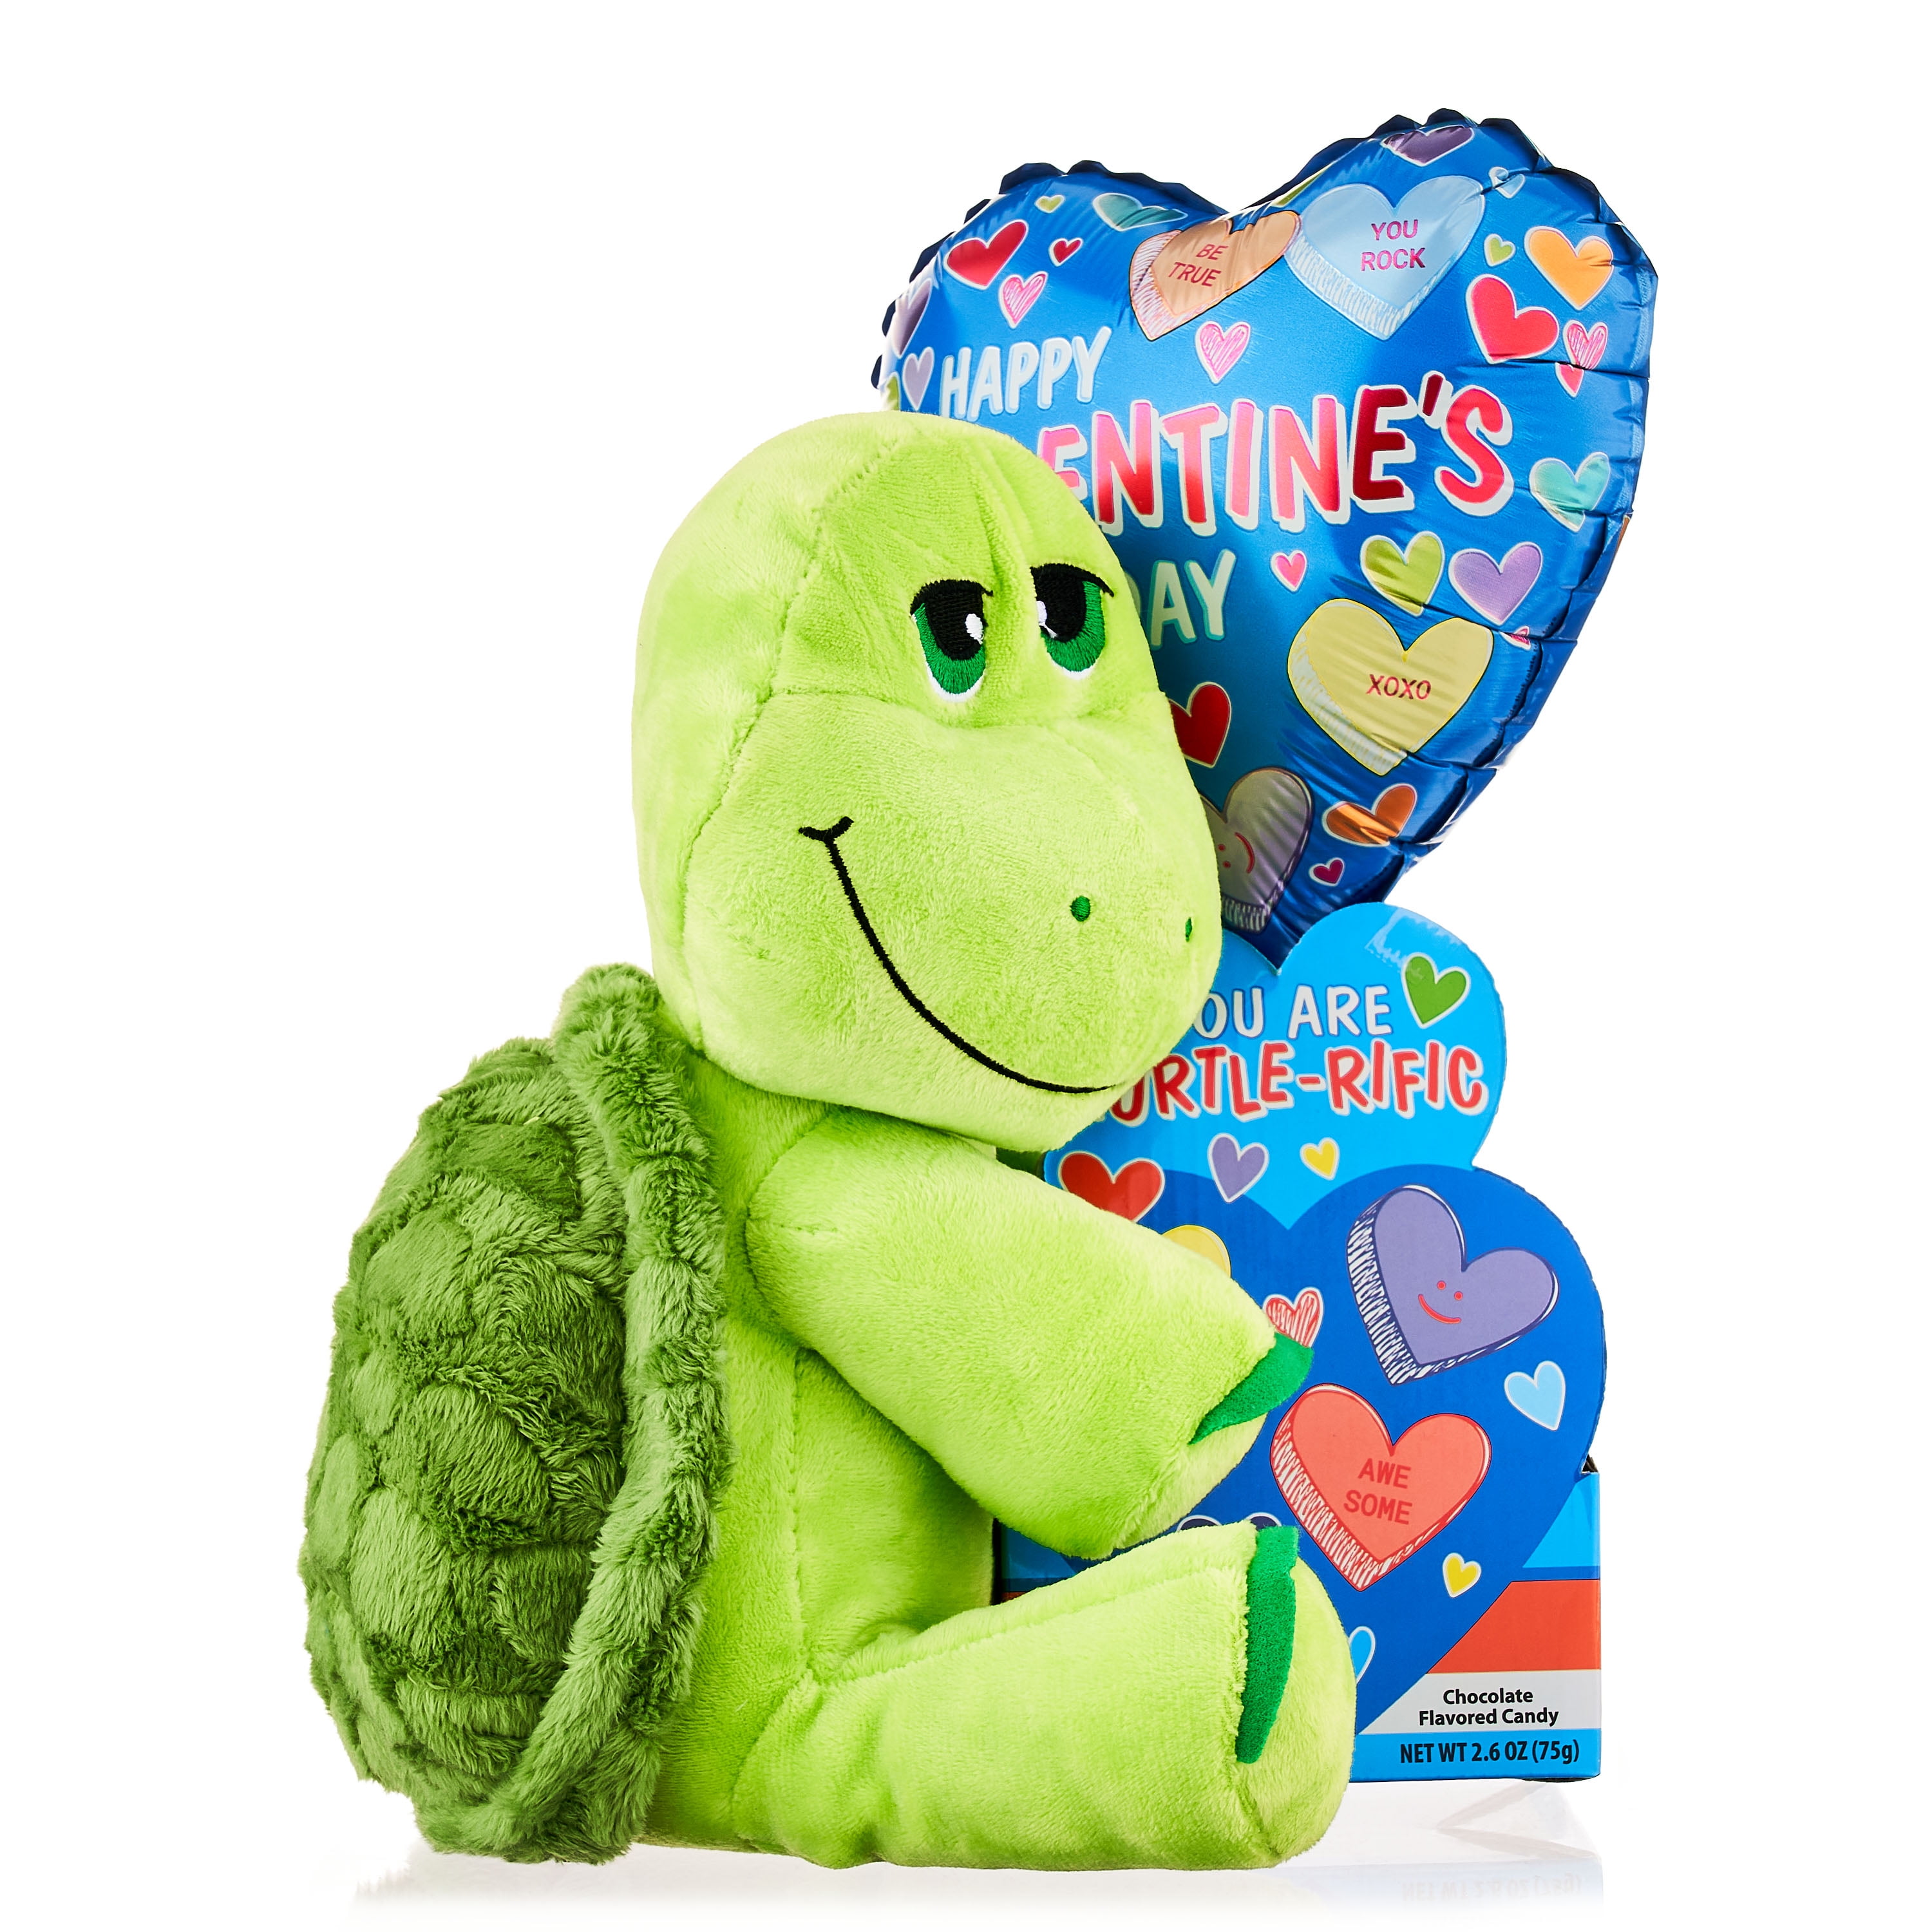 WAY TO CELEBRATE! Way To Celebrate Valentine's Day Balloon and Candy Turtle Plush